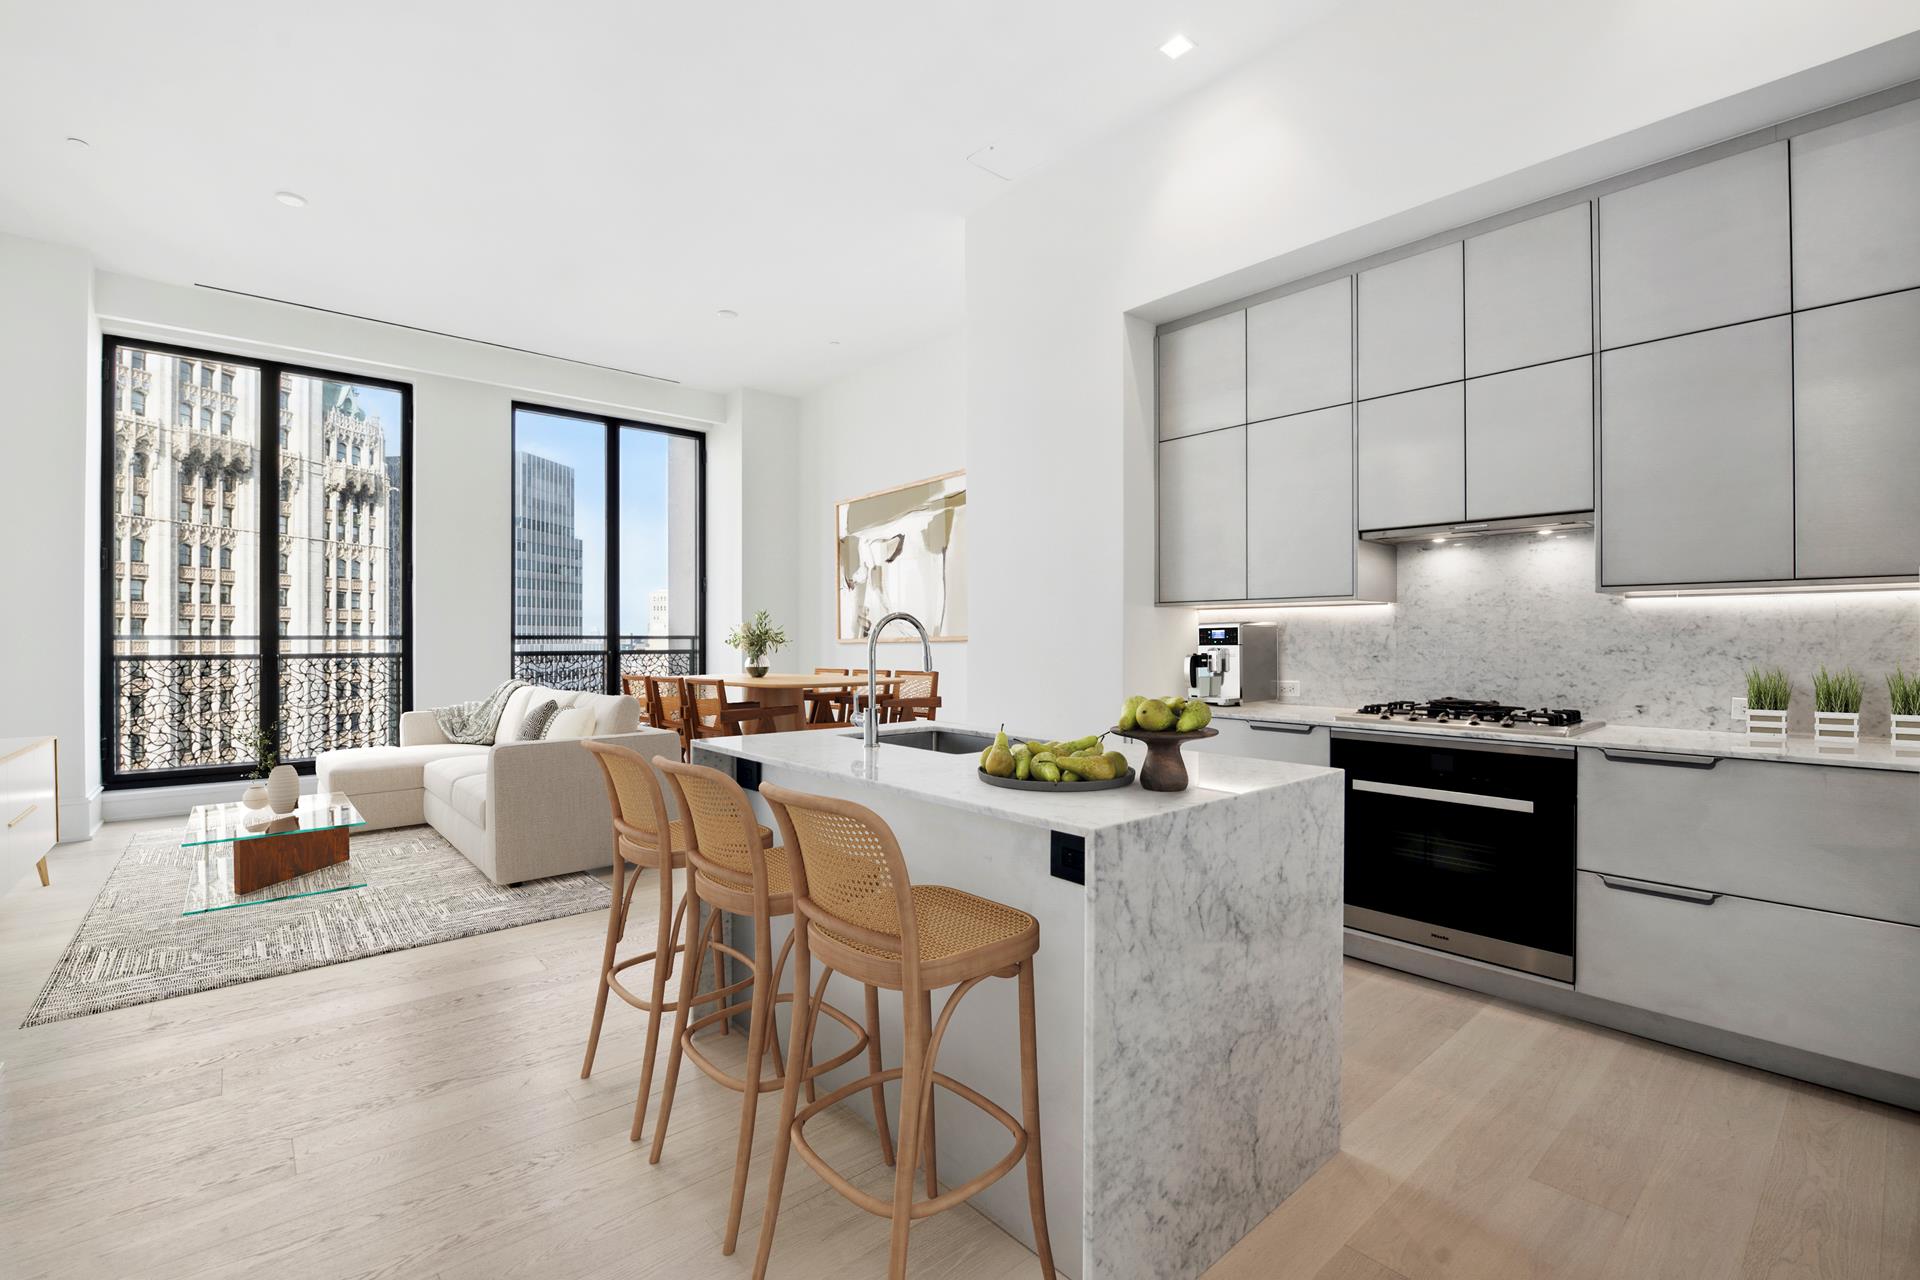 25 Park Row 22A, Lower Manhattan, Downtown, NYC - 2 Bedrooms  
2.5 Bathrooms  
4 Rooms - 